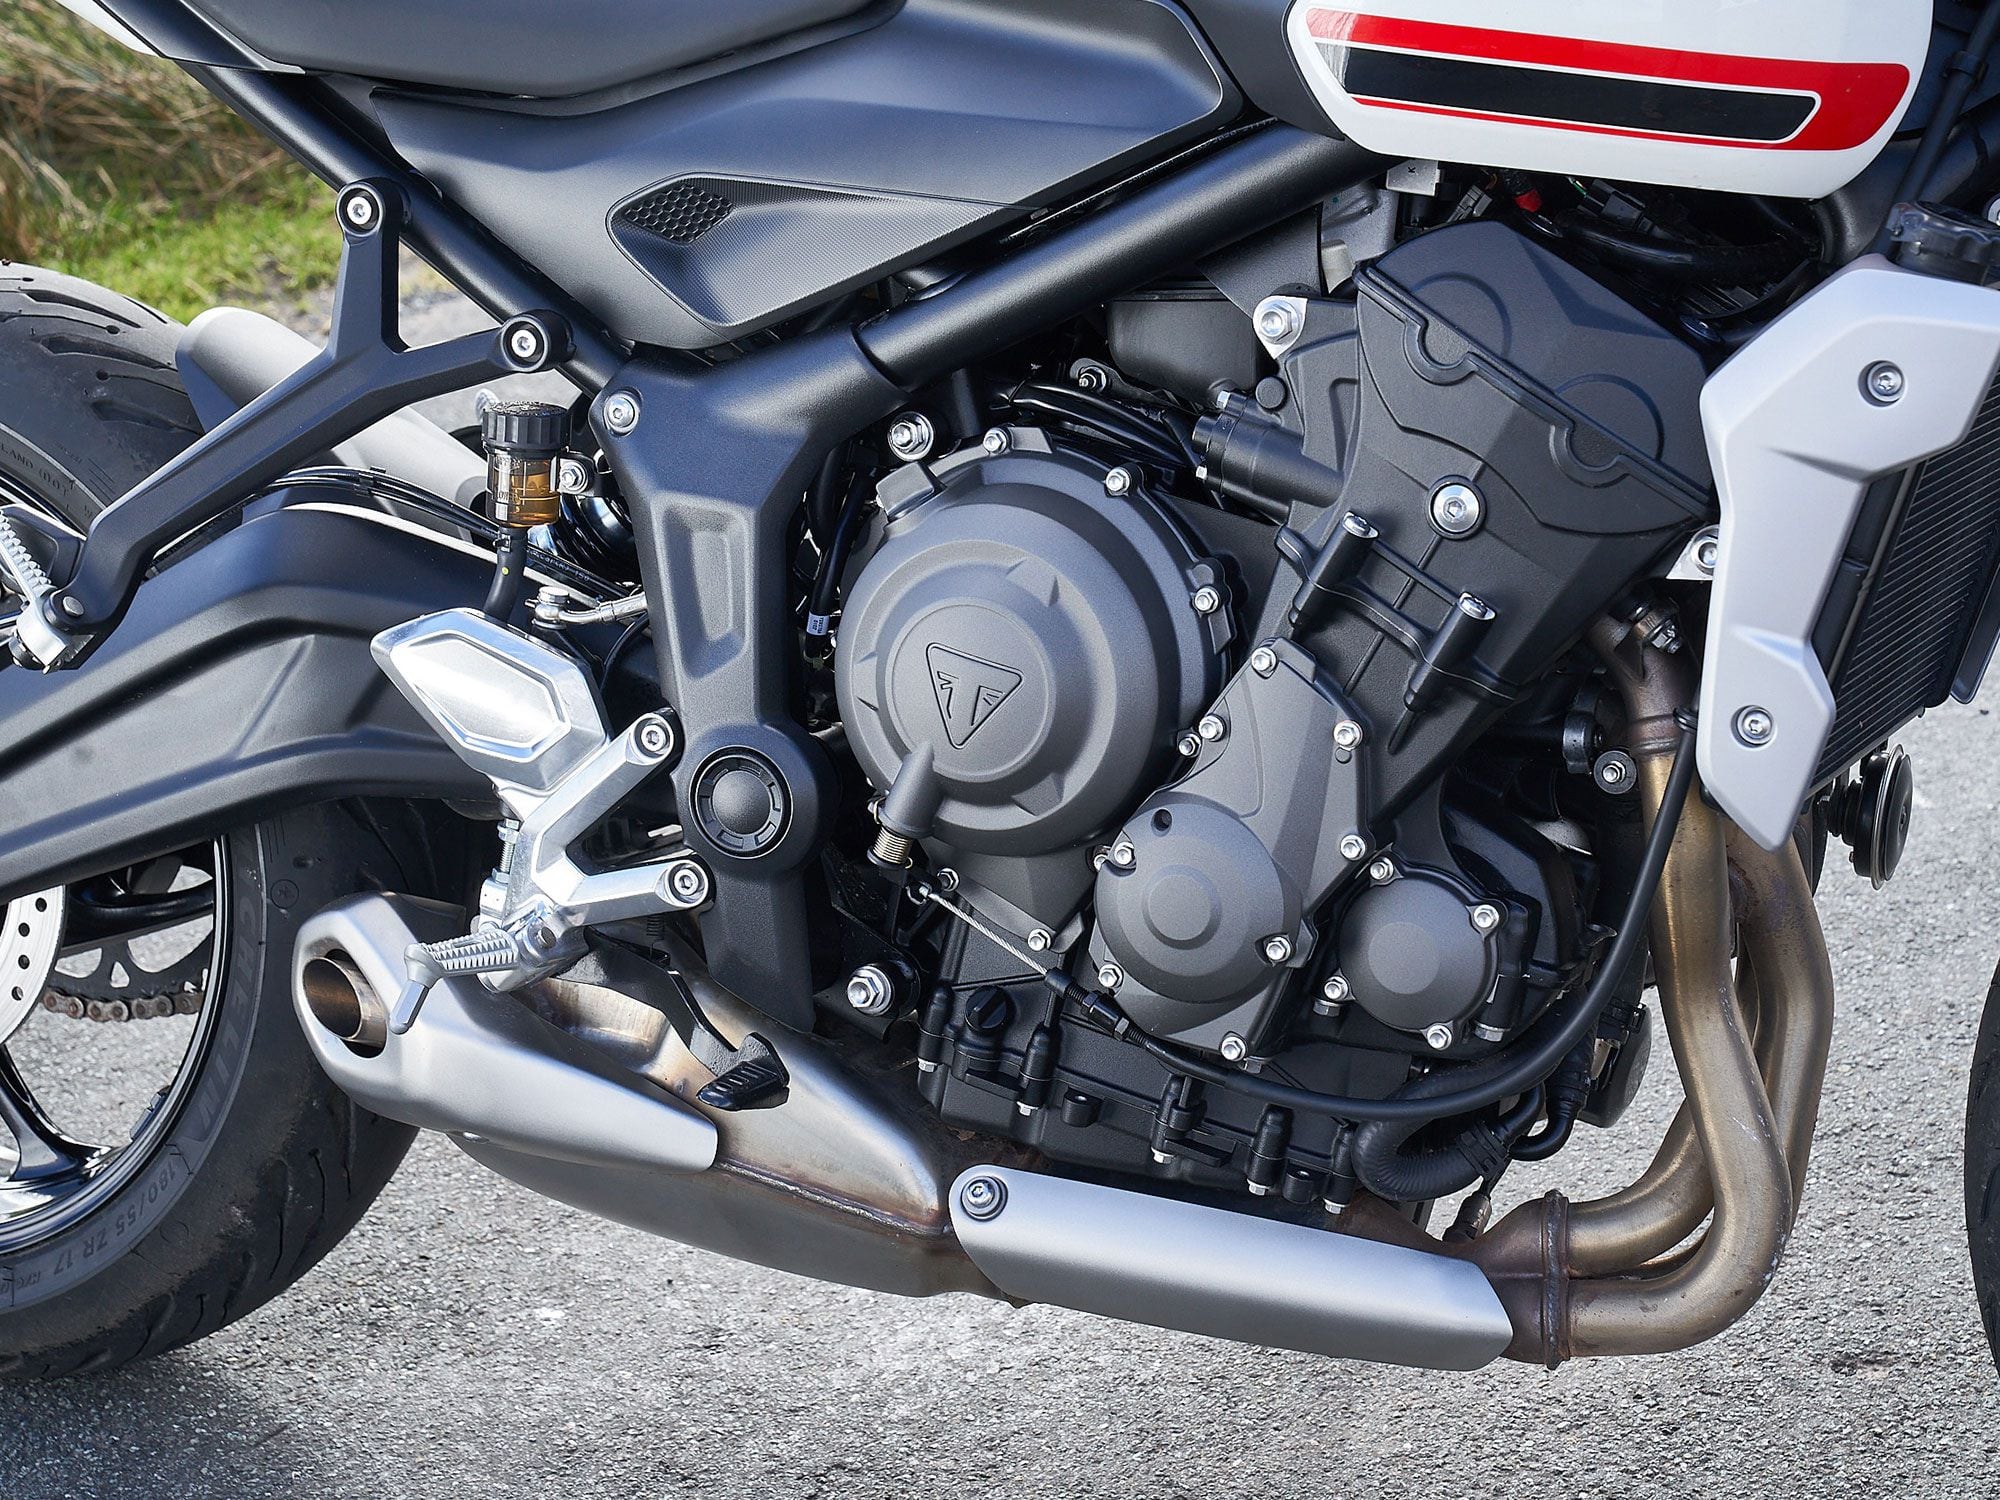 A shorter 51.1mm stroke is used on the Trident’s engine to reduce the capacity to 660cc, down 15cc from the previous-generation 675 triple used in the Street Triple.